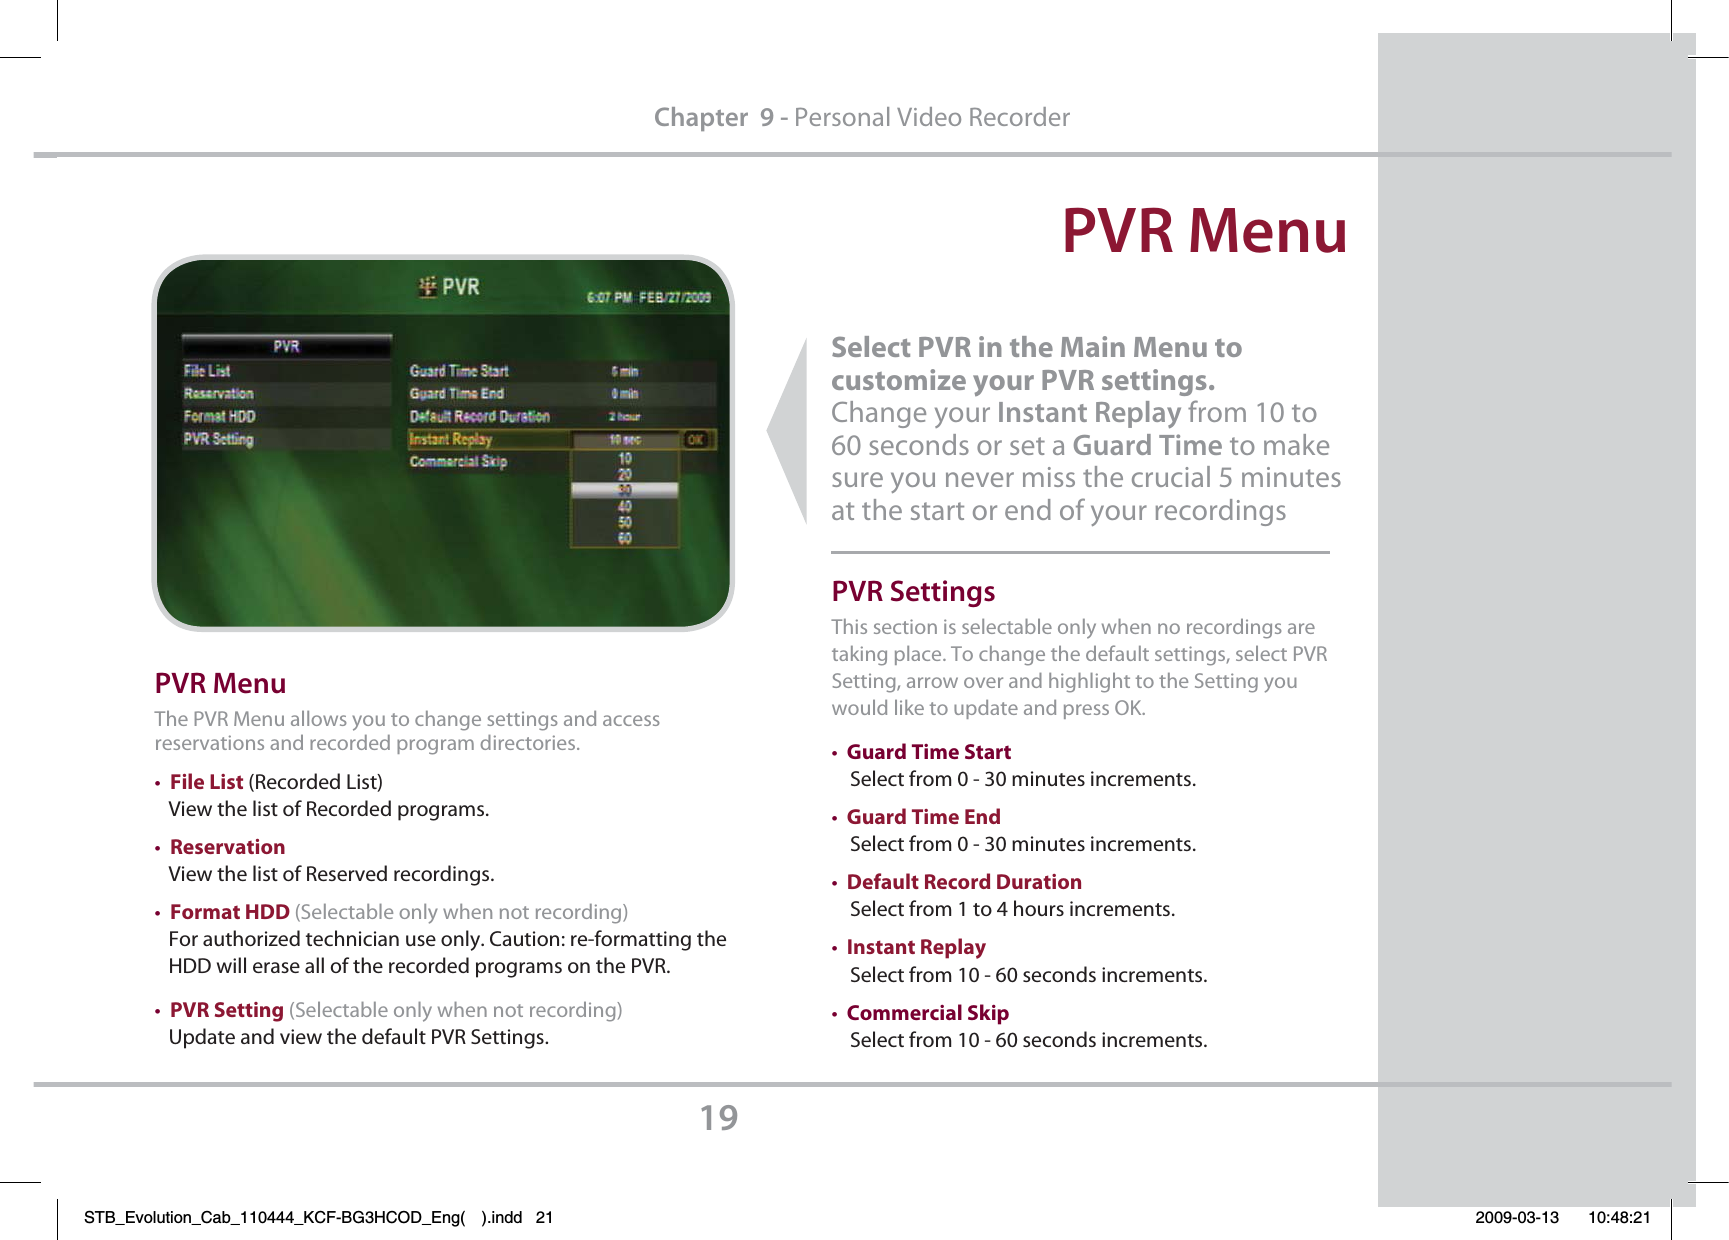 PVR Menu19Chapter  9 - Personal Video RecorderSelect PVR in the Main Menu to         customize your PVR settings.  Change your Instant Replay from 10 to 60 seconds or set a Guard Time to make sure you never miss the crucial 5 minutes at the start or end of your recordings PVR MenuThe PVR Menu allows you to change settings and access reservations and recorded program directories.tFile List (Recorded List)   View the list of Recorded programs.tReservation   View the list of Reserved recordings.tFormat HDD (Selectable only when not recording)   For authorized technician use only. Caution: re-formatting the   HDD will erase all of the recorded programs on the PVR.tPVR Setting (Selectable only when not recording)   Update and view the default PVR Settings.PVR SettingsThis section is selectable only when no recordings are   taking place. To change the default settings, select PVR Setting, arrow over and highlight to the Setting you would like to update and press OK. tGuard Time Start    Select from 0 - 30 minutes increments.tGuard Time End    Select from 0 - 30 minutes increments.tDefault Record Duration     Select from 1 to 4 hours increments.tInstant Replay    Select from 10 - 60 seconds increments.tCommercial Skip     Select from 10 - 60 seconds increments.STB_Evolution_Cab_110444_KCF-BG3HCOD_Eng( ).indd   21 2009-03-13     10:48:21